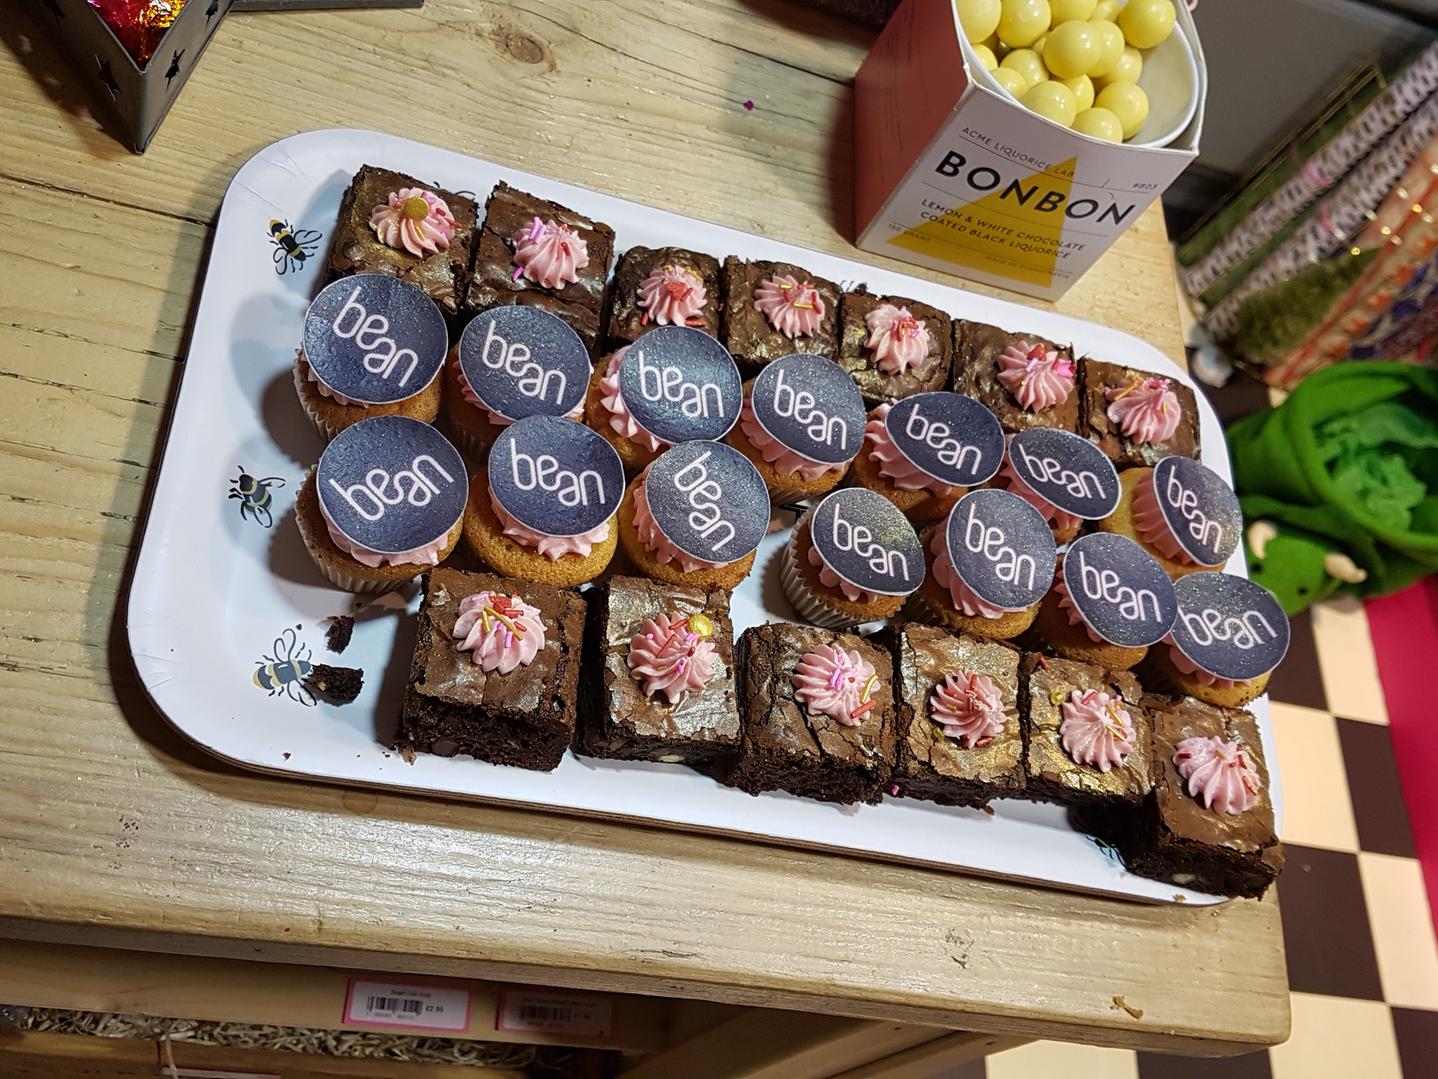 The Bean Hive celebrated their Christmas launch with brownies by Bron's Bakes and glasses of fizz